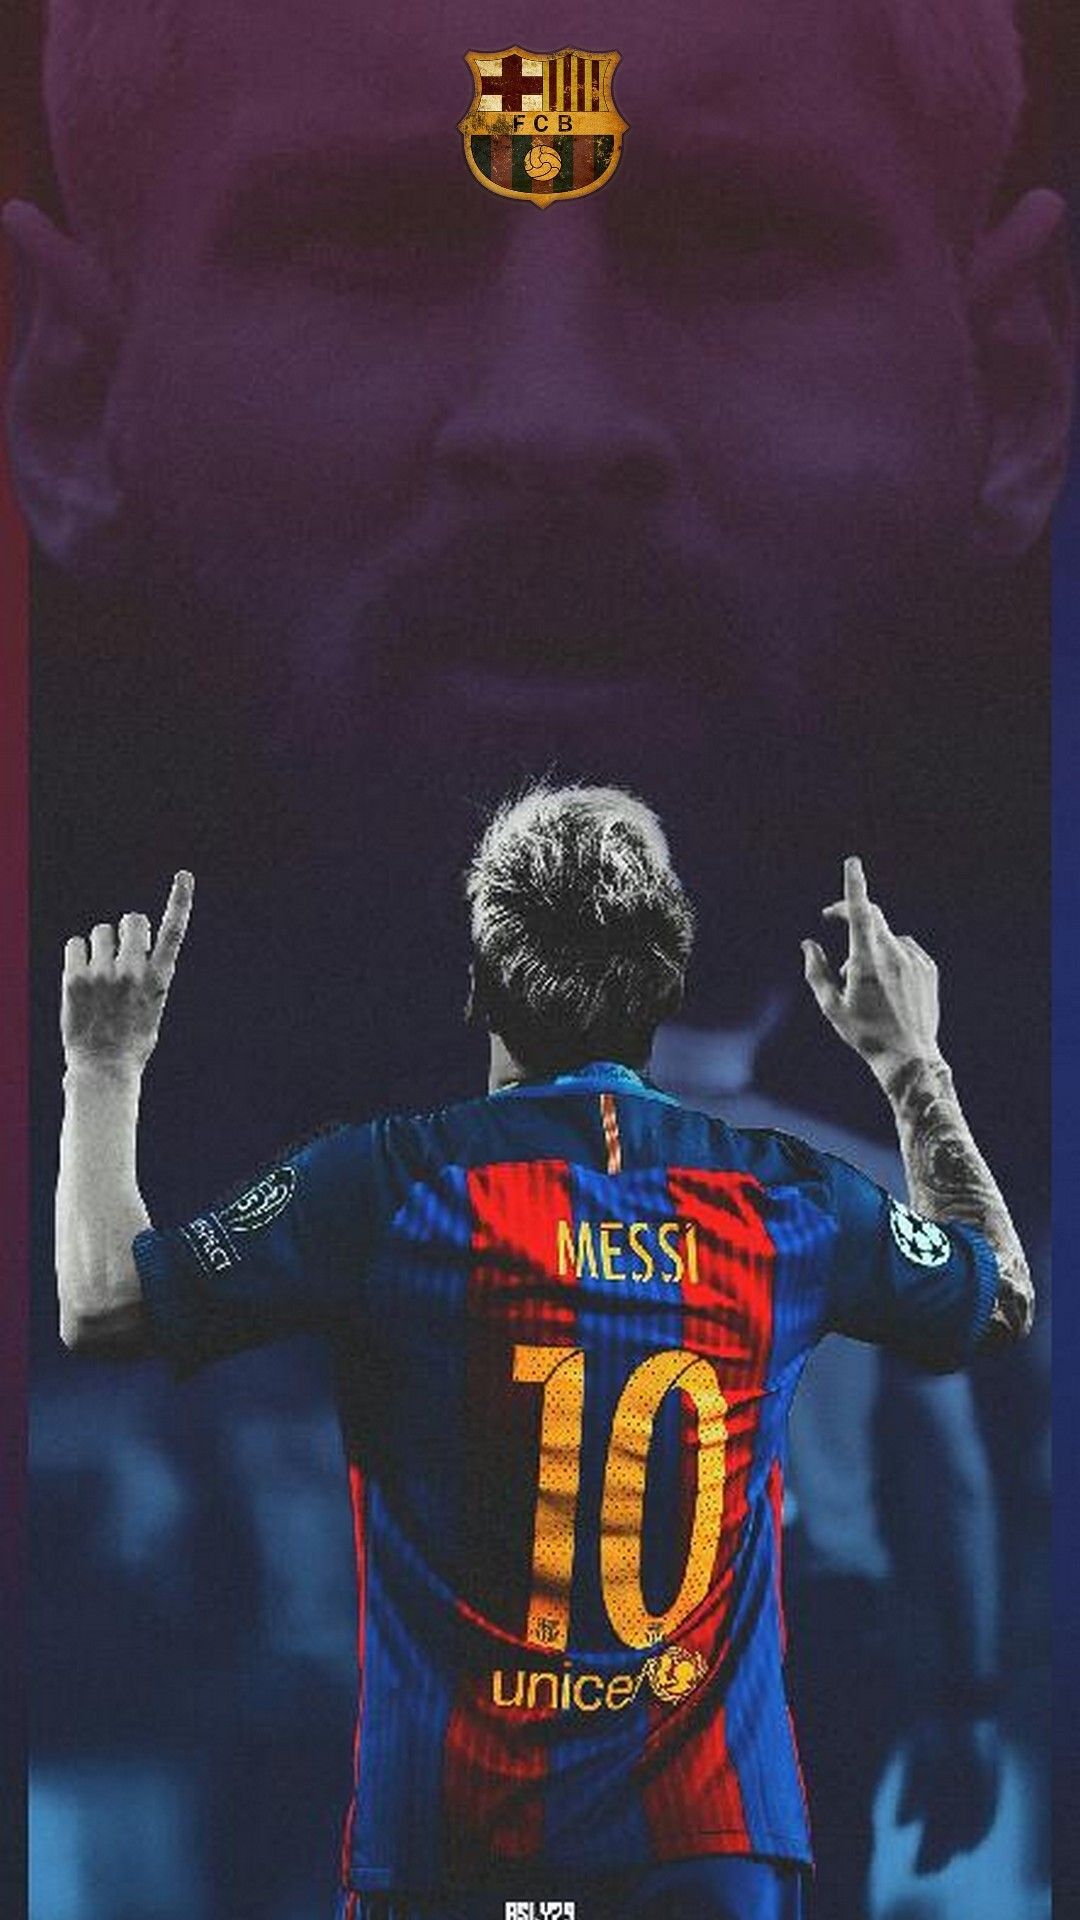 Barca Iphone Wallpapers